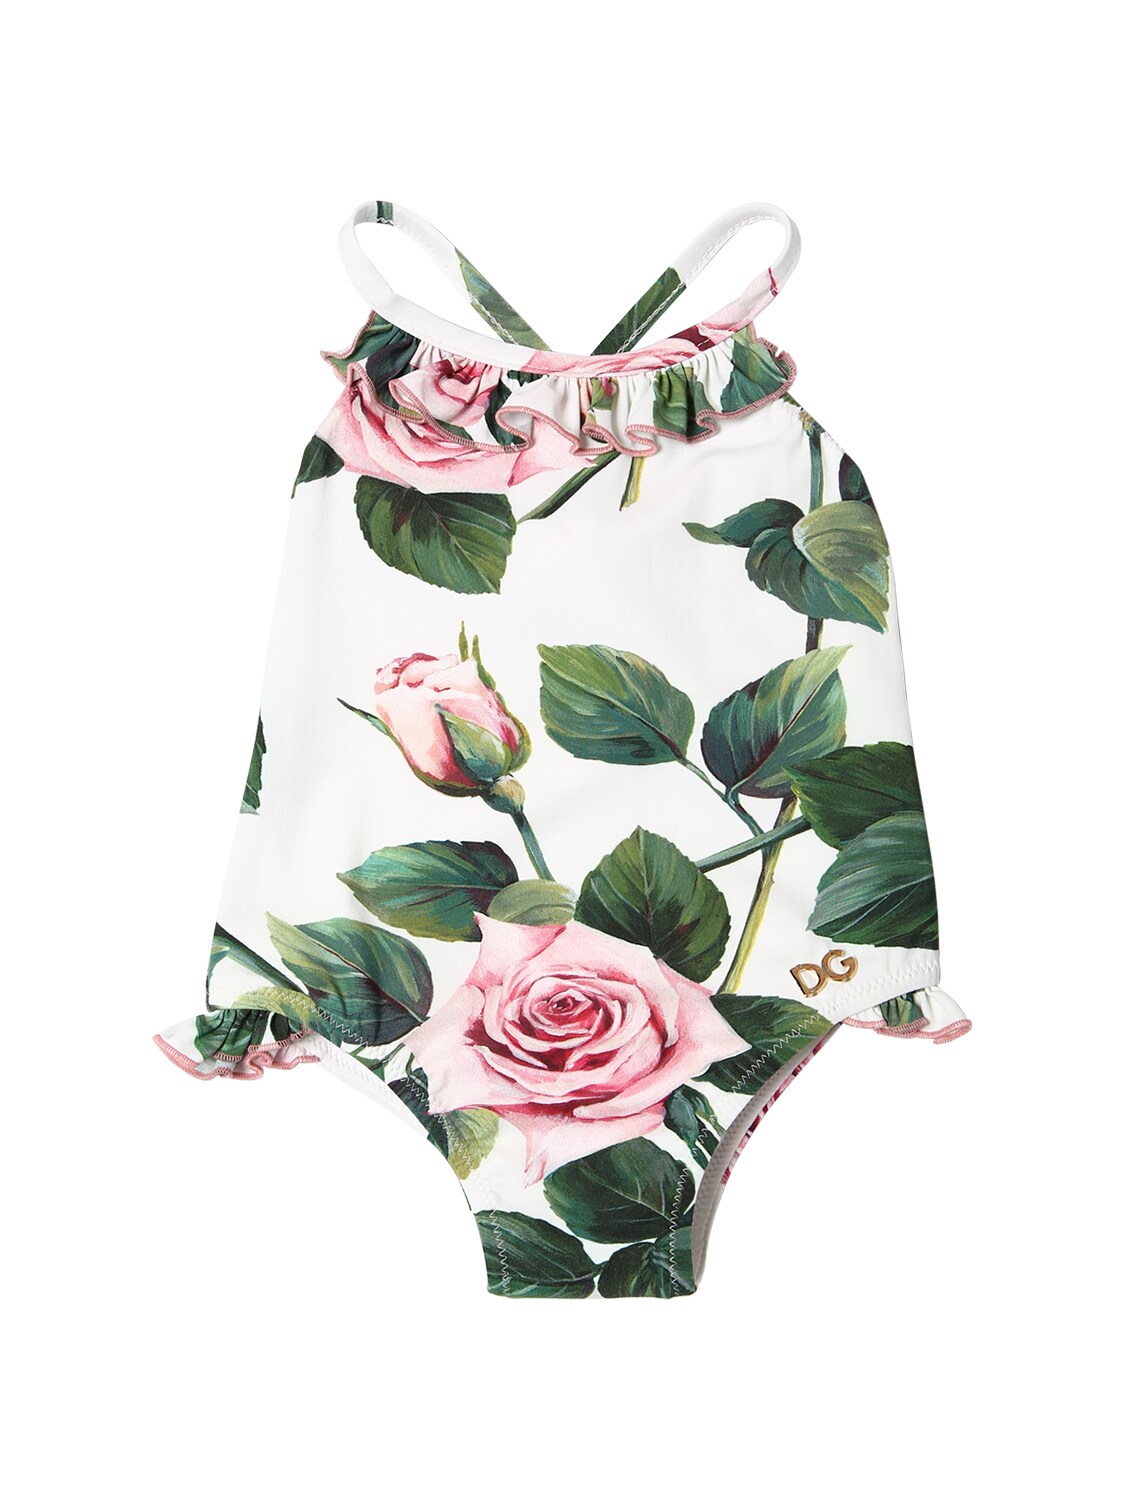 DOLCE & GABBANA ROSE PRINT LYCRA ONE PIECE SWIMSUIT,71I6SQ008-SEE5NKM1